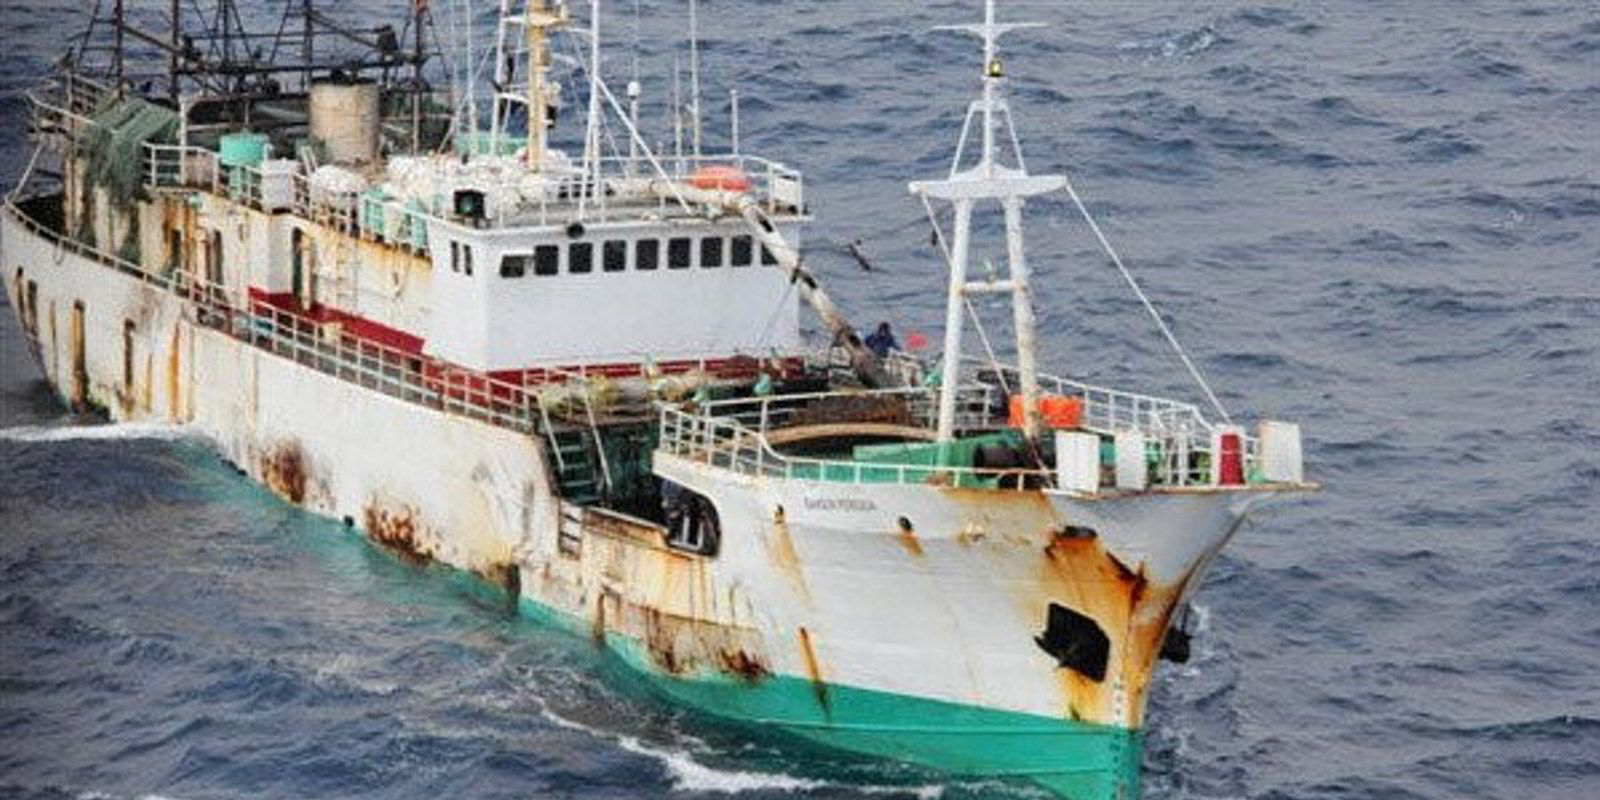 Global fishing-related deaths estimated at 100,000 each year, new